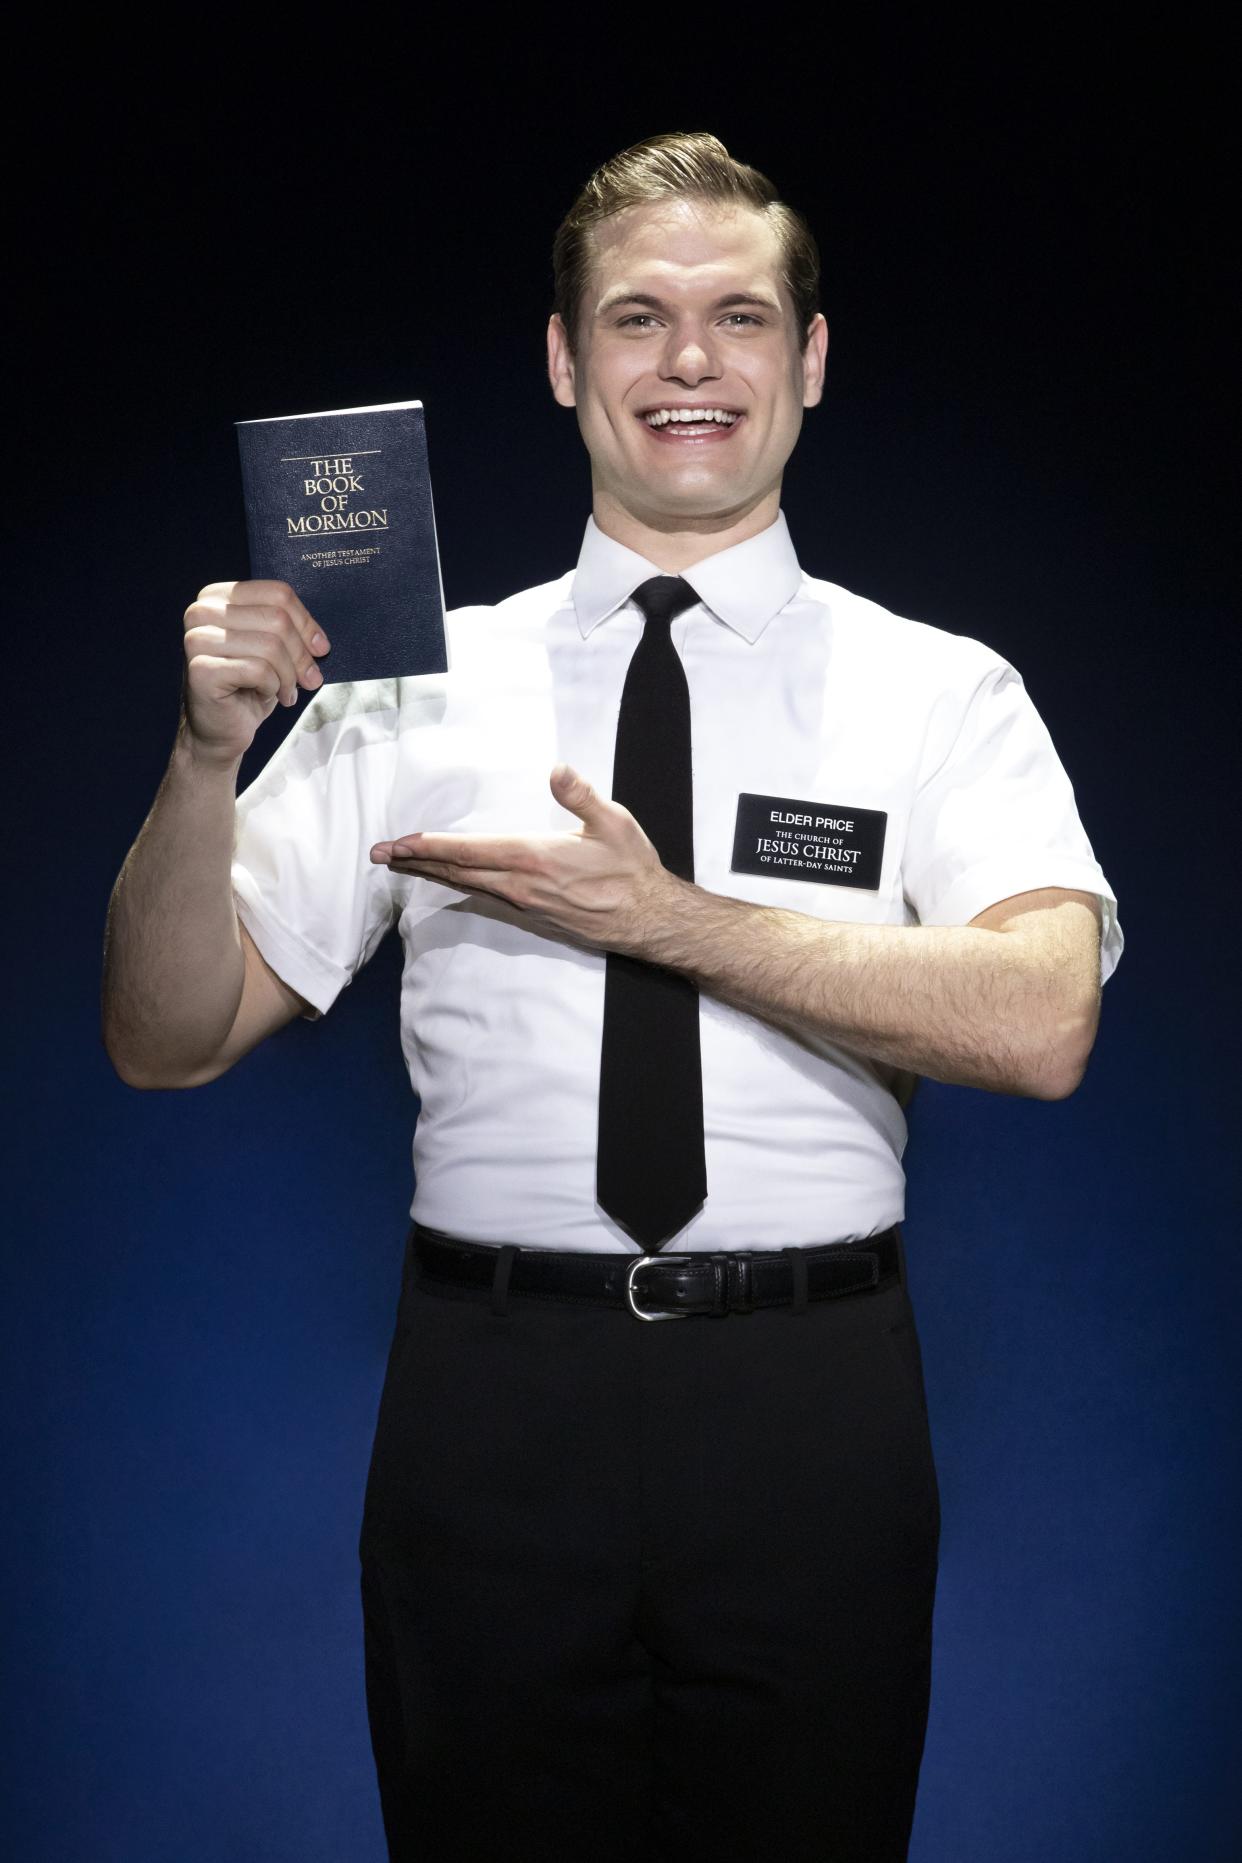 Elder Price (Sam McLellan) dreams of spending his two-year mission in Orlando so he can be close to Disney World. But as “The Book of Mormon” unfolds, things don’t go according to plan when he is assigned to travel to rural Uganda.